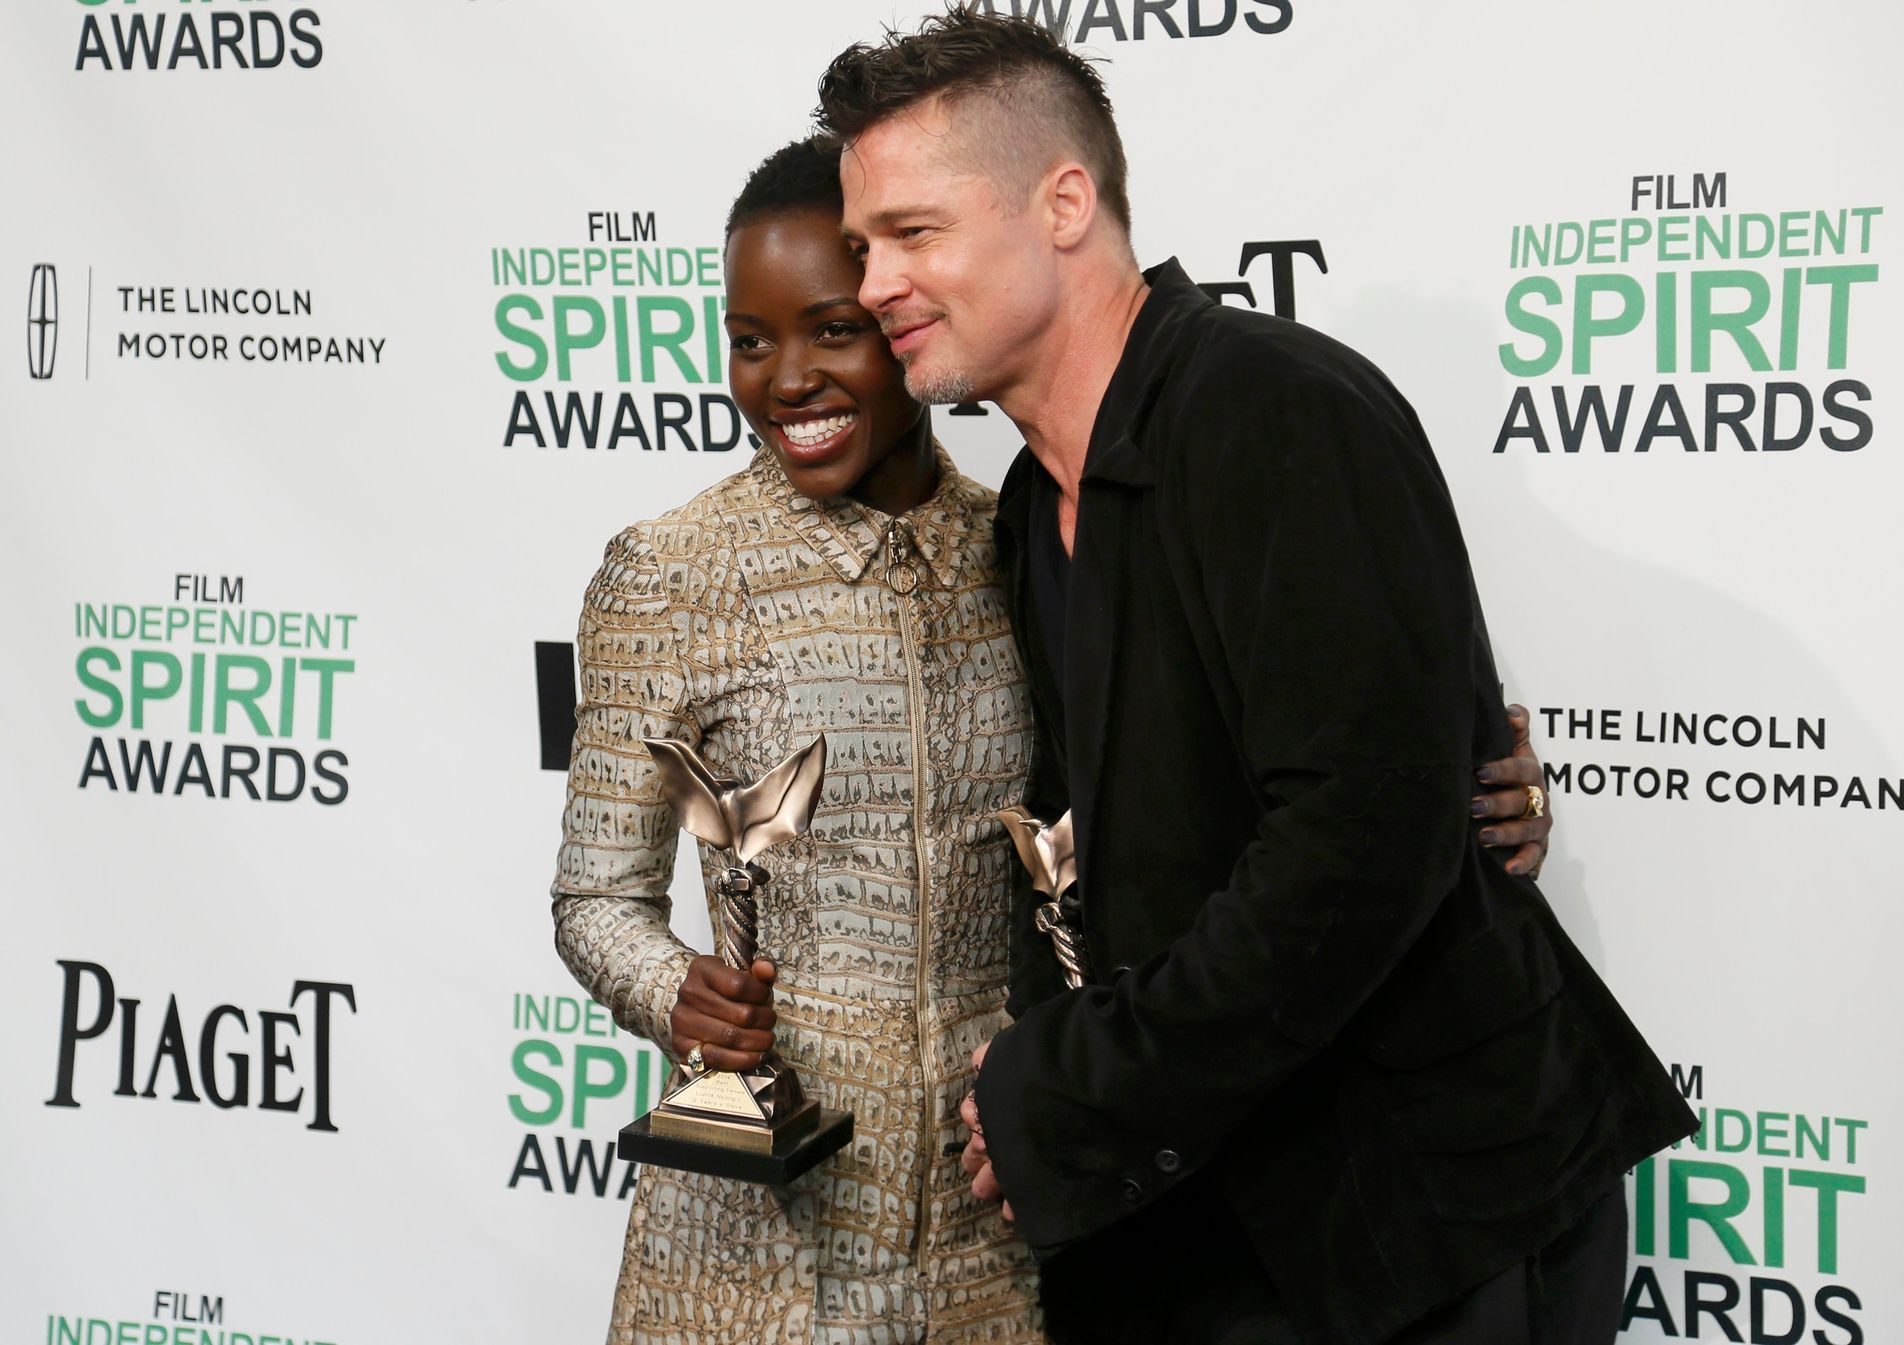 Producer Brad Pitt and actress Lupita Nyong'o pose with their awards for &quot;12 Years a Slave&quot; backstage at the 2014 Film Independent Spirit Awards in Santa Monica